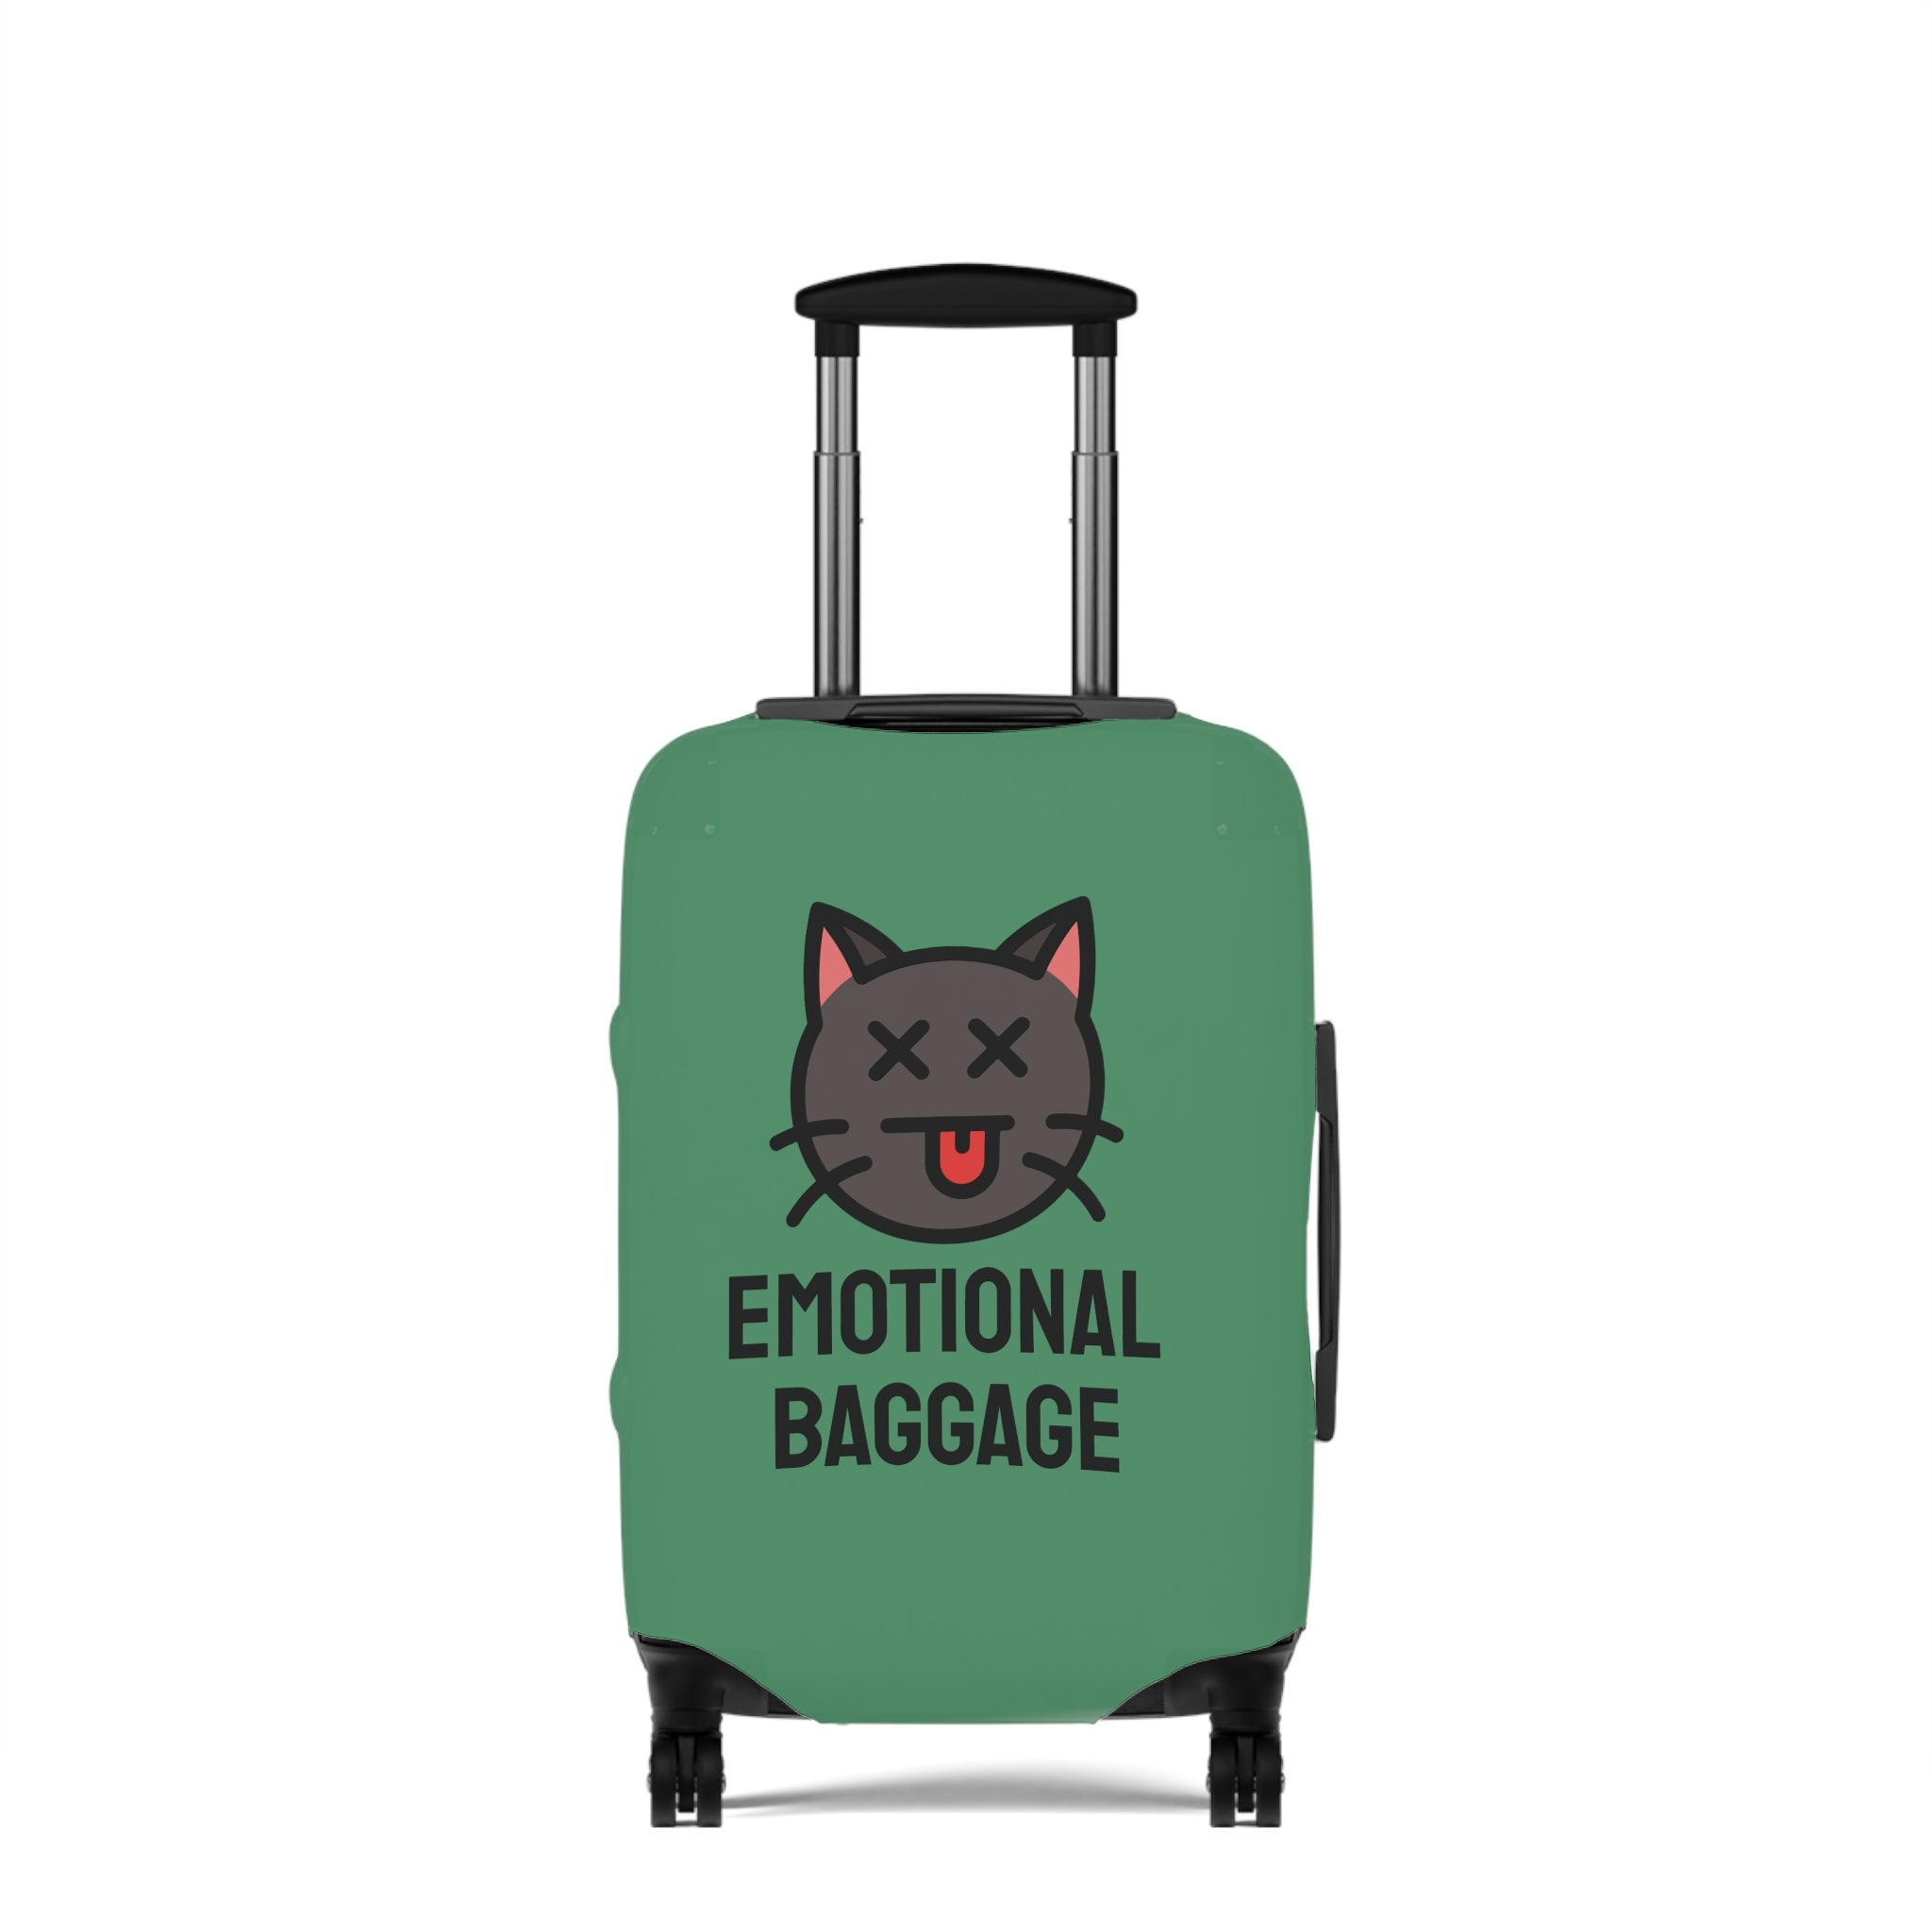 Emotional baggage Luggage Cover (Green)